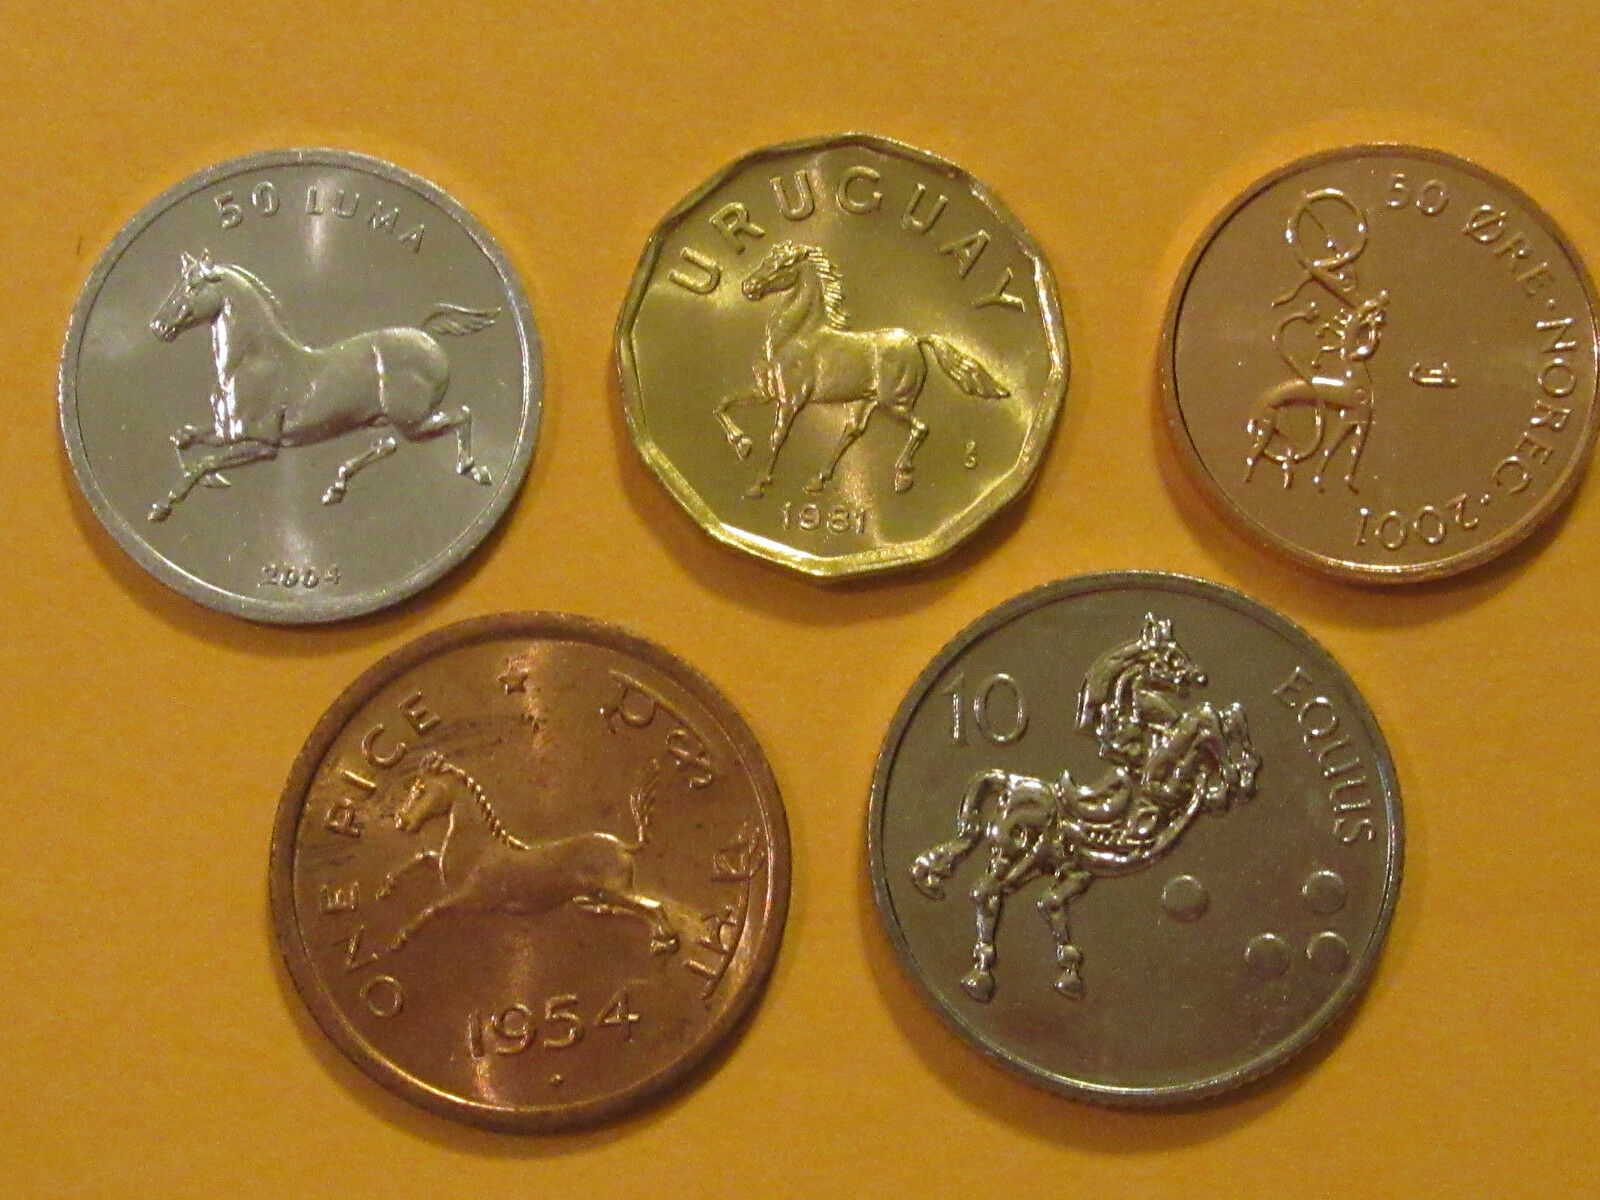 Horse Coin Set 5 Coins  Uncirculated India Norway Animal Coin Nice Starter Set